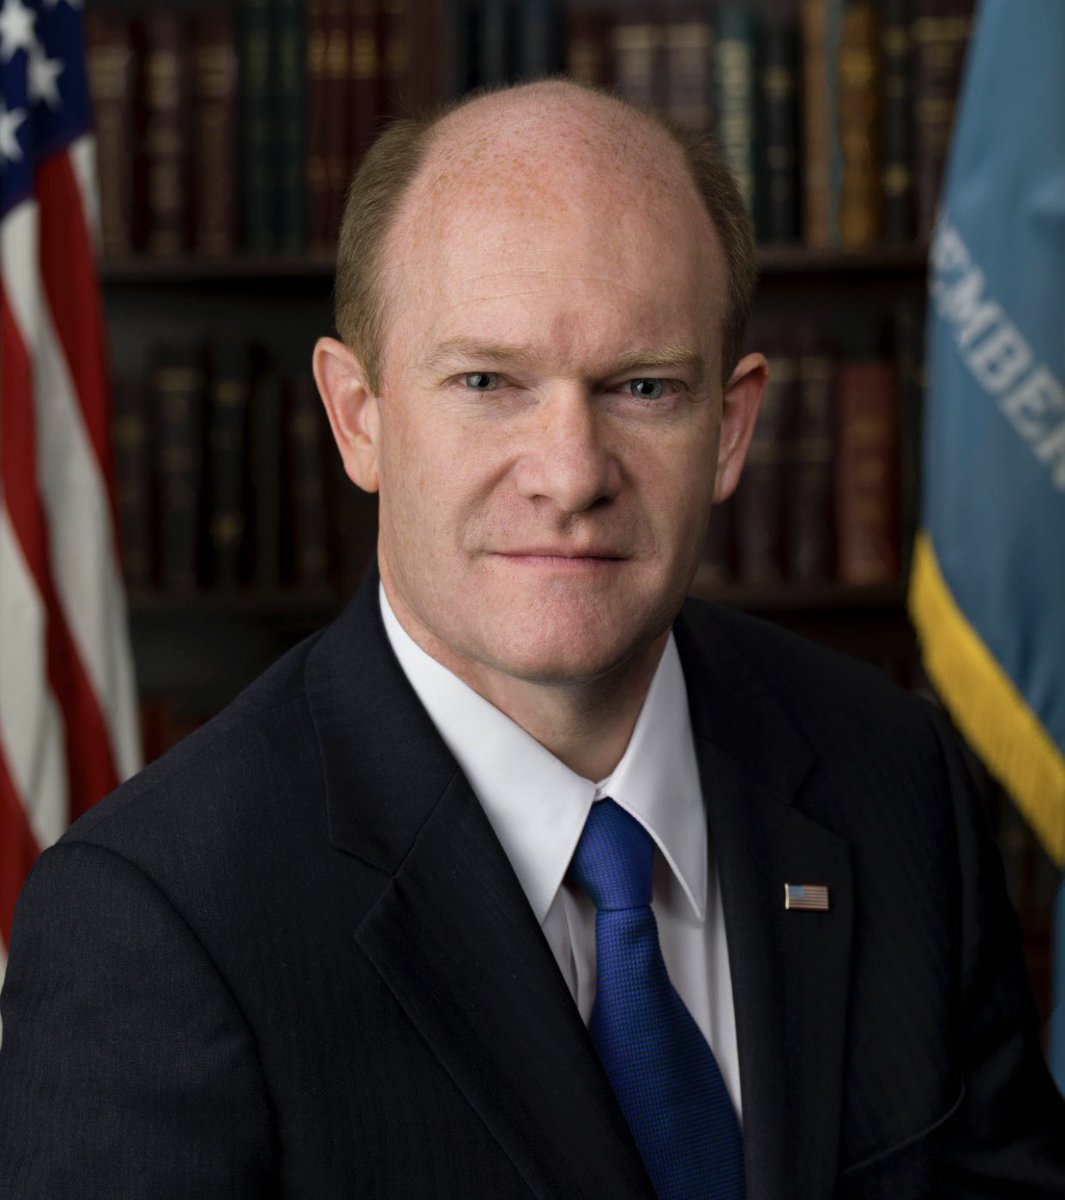 Thanks @ChrisCoons for joining @JulieMasonShow1 4:35 PM East on foreign aid bills and what’s next for Ukraine. Listen SiriusXM 124.